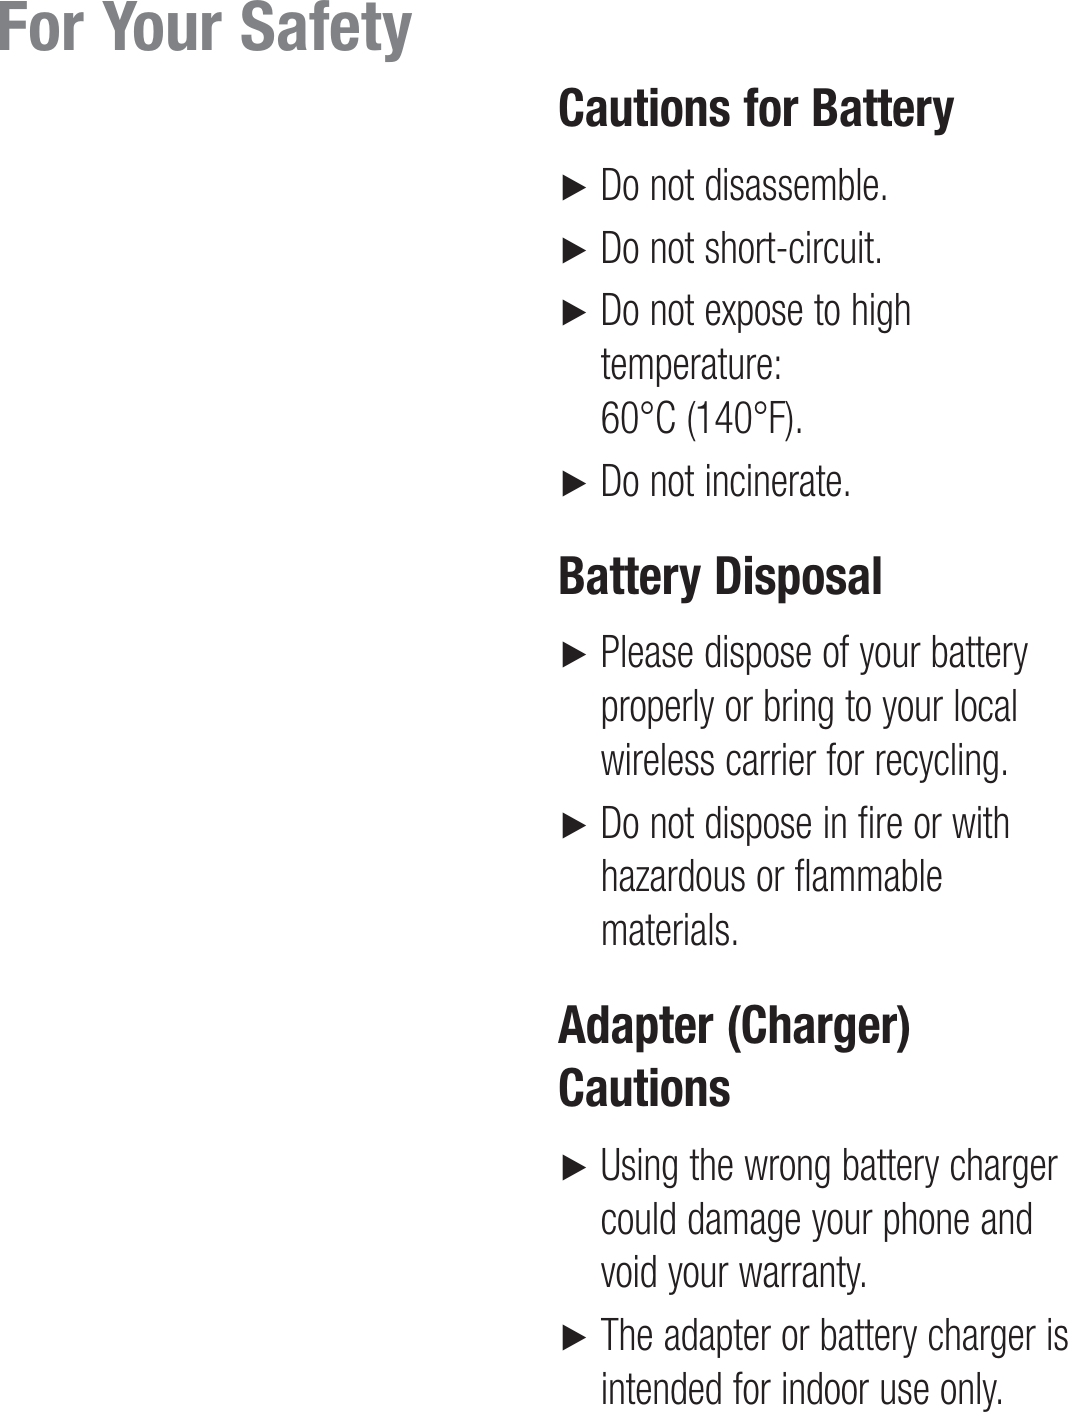    Cautions for Battery►     Do not disassemble.►    Do not short-circuit.►    Do not expose to high temperature:  60°C (140°F).►    Do not incinerate.Battery Disposal►    Please dispose of your battery properly or bring to your local wireless carrier for recycling.►    Do not dispose in fire or with hazardous or flammable materials.Adapter (Charger) Cautions►    Using the wrong battery charger could damage your phone and void your warranty.►    The adapter or battery charger is intended for indoor use only.For Your Safety